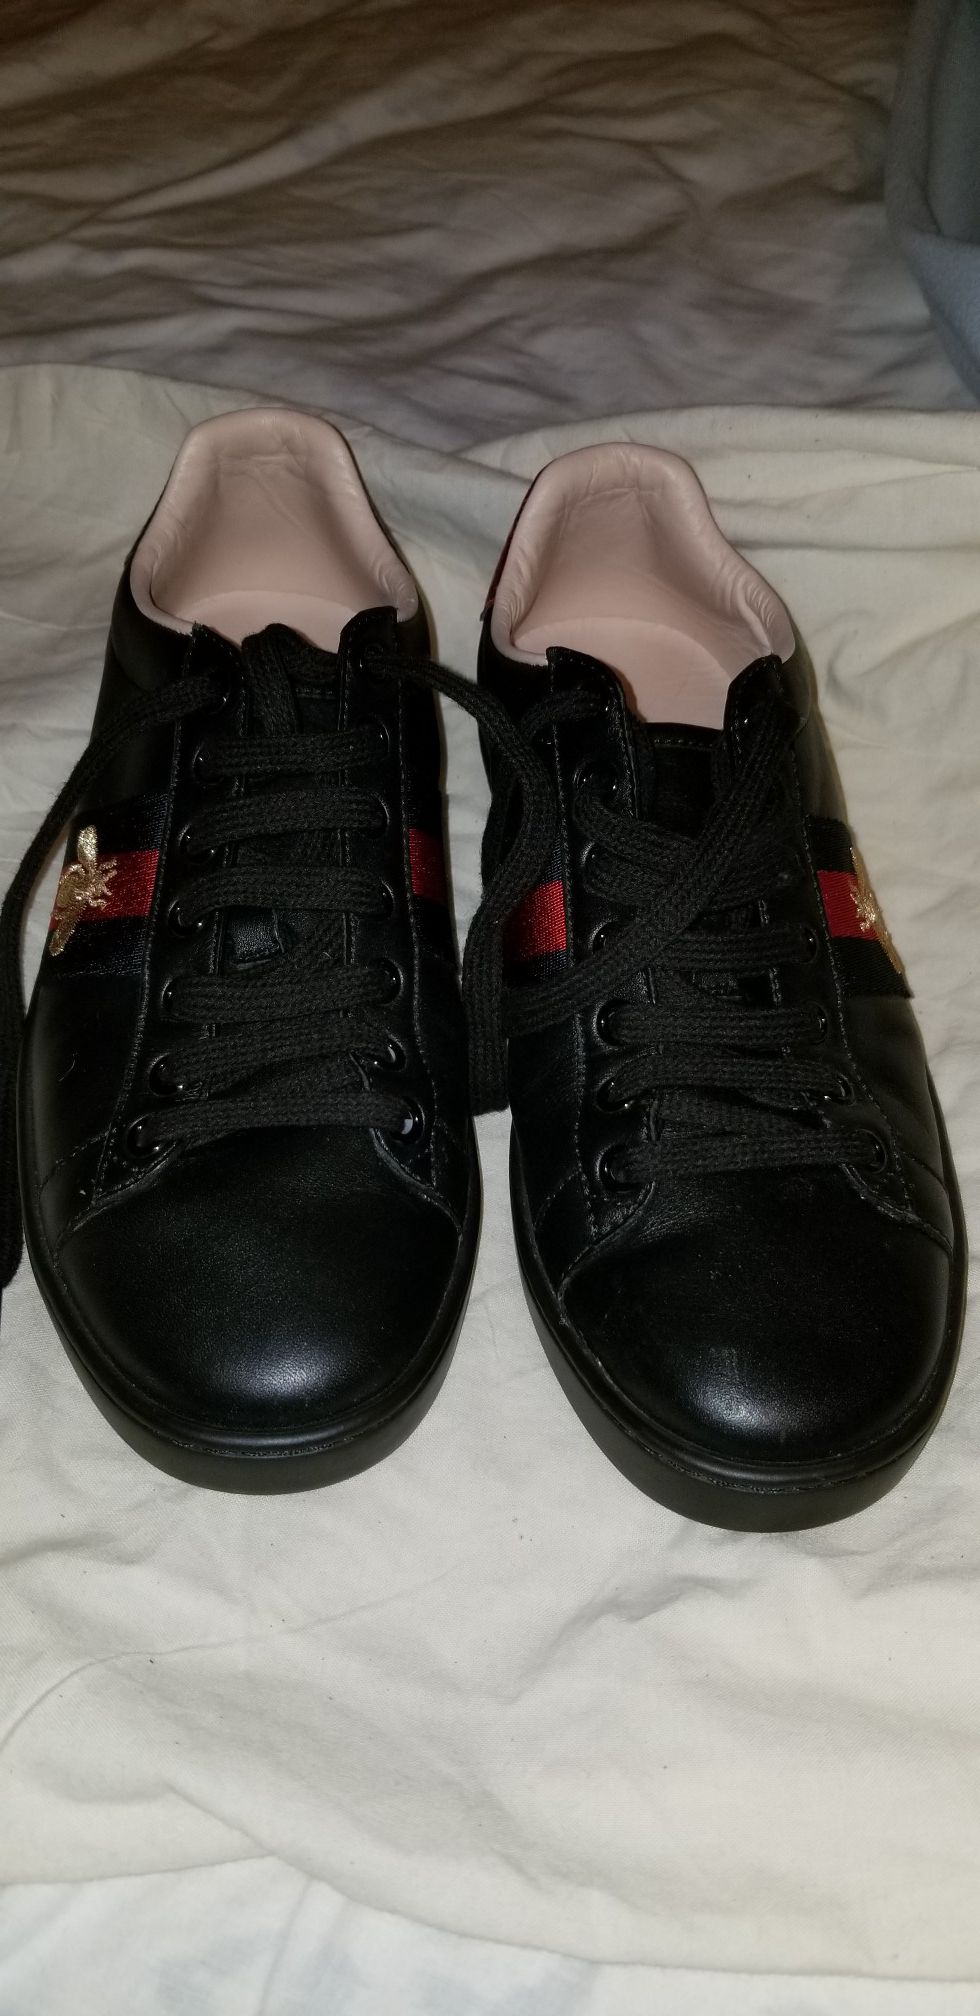 Not SOLD ! Gucci Ace sneakers with Bee size 36 1/2 but fits like a us size 7/7.5 womens